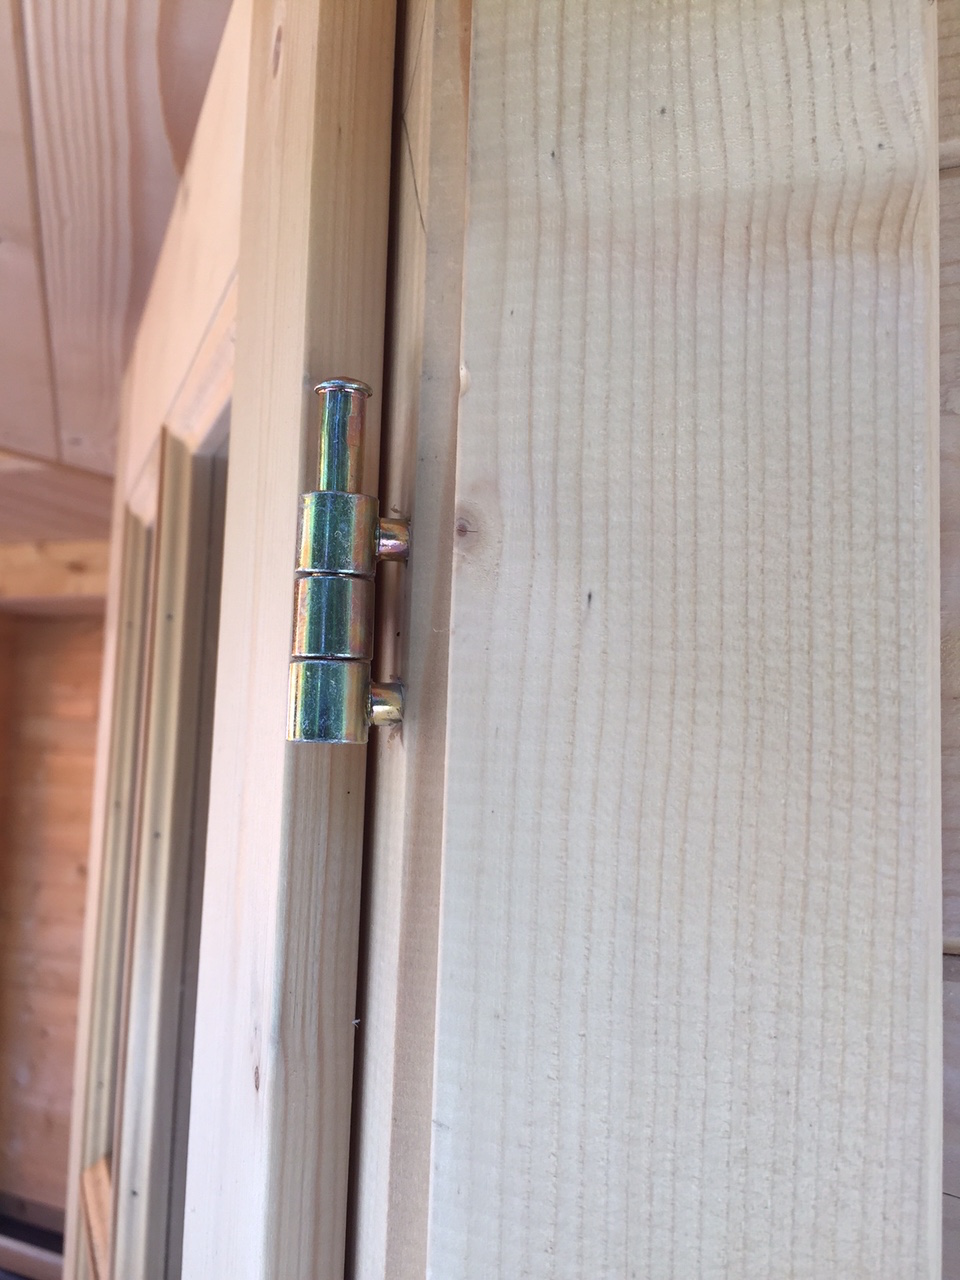 The hinge pins can be left loose while you carry out the adjustment of the hinges